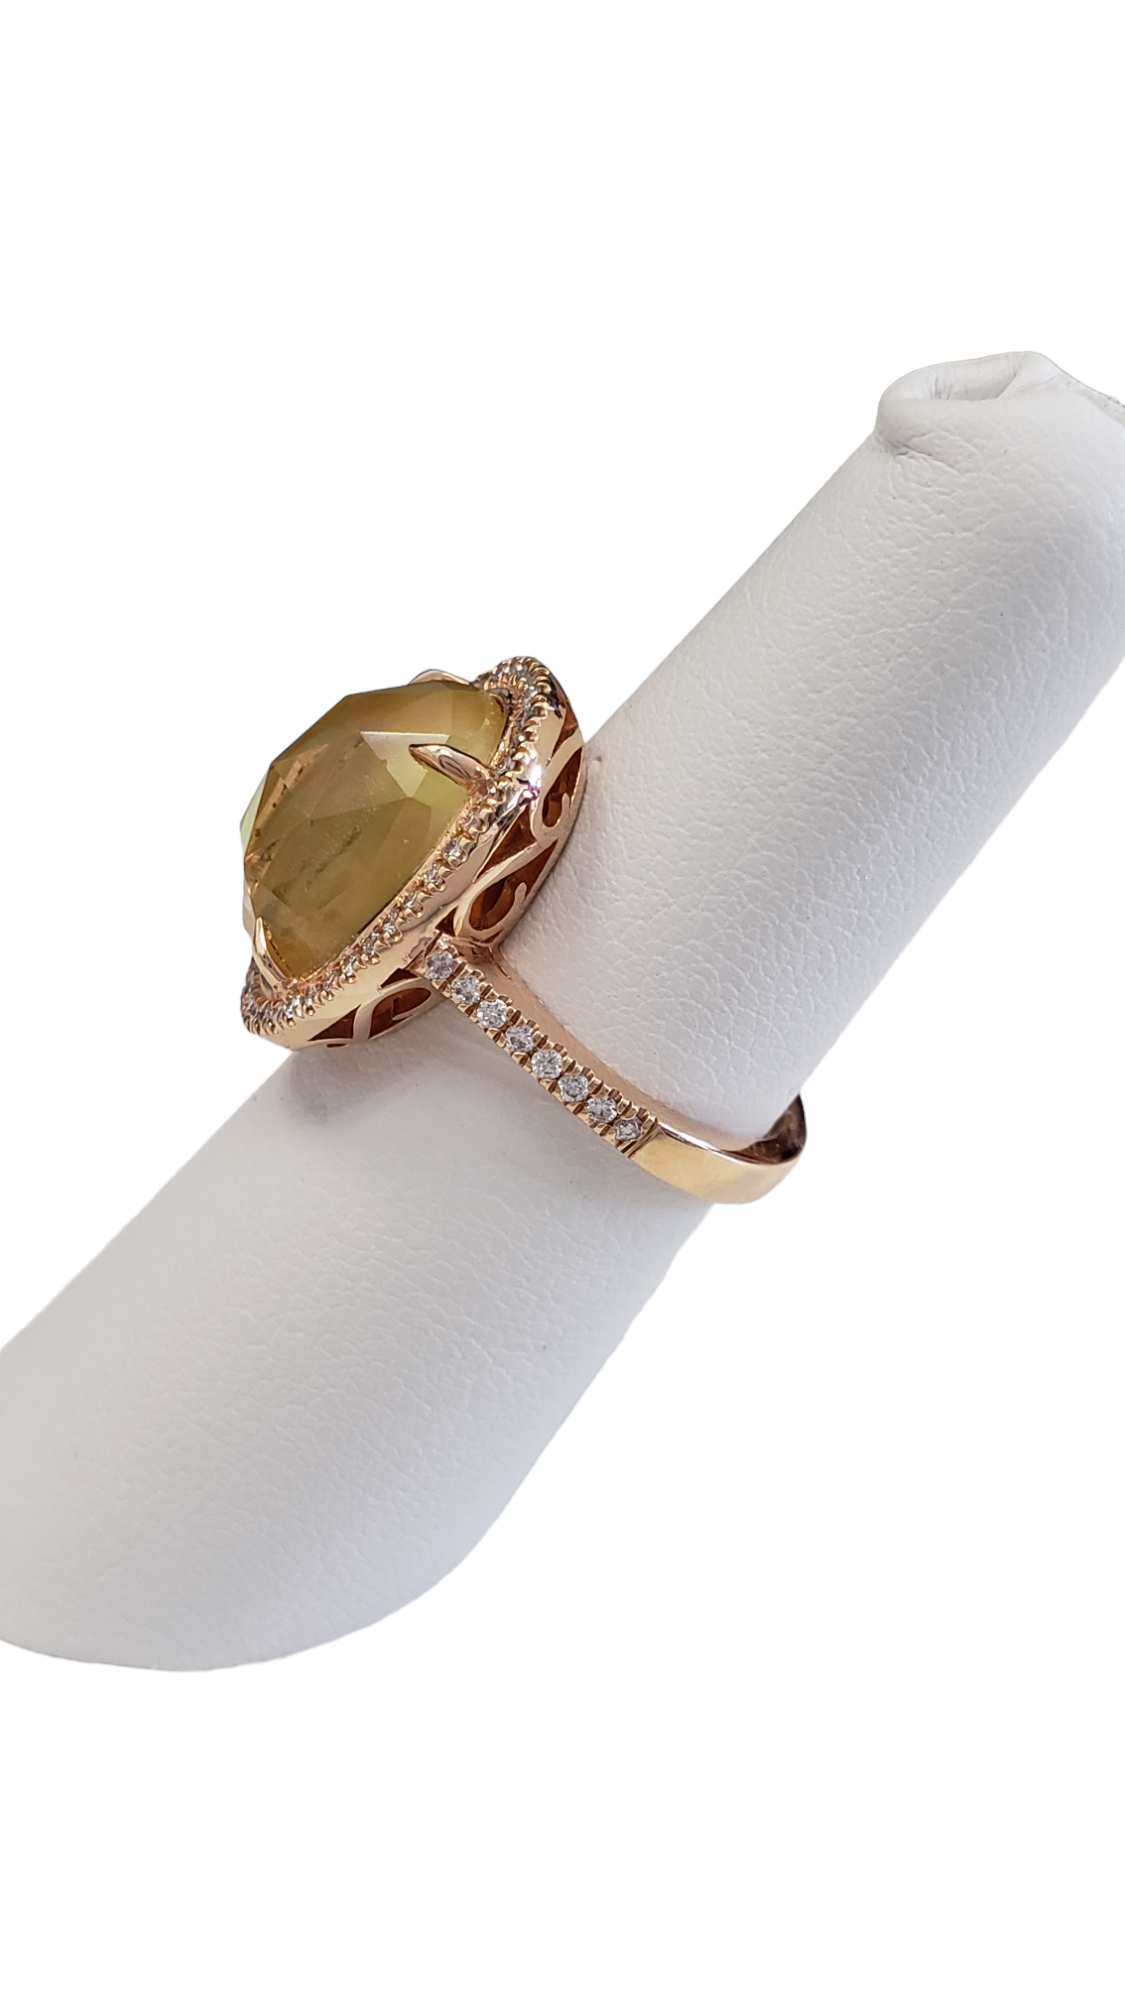 Quartz on Mother of Pearl with Diamonds 18K Rose Gold Women's Ring